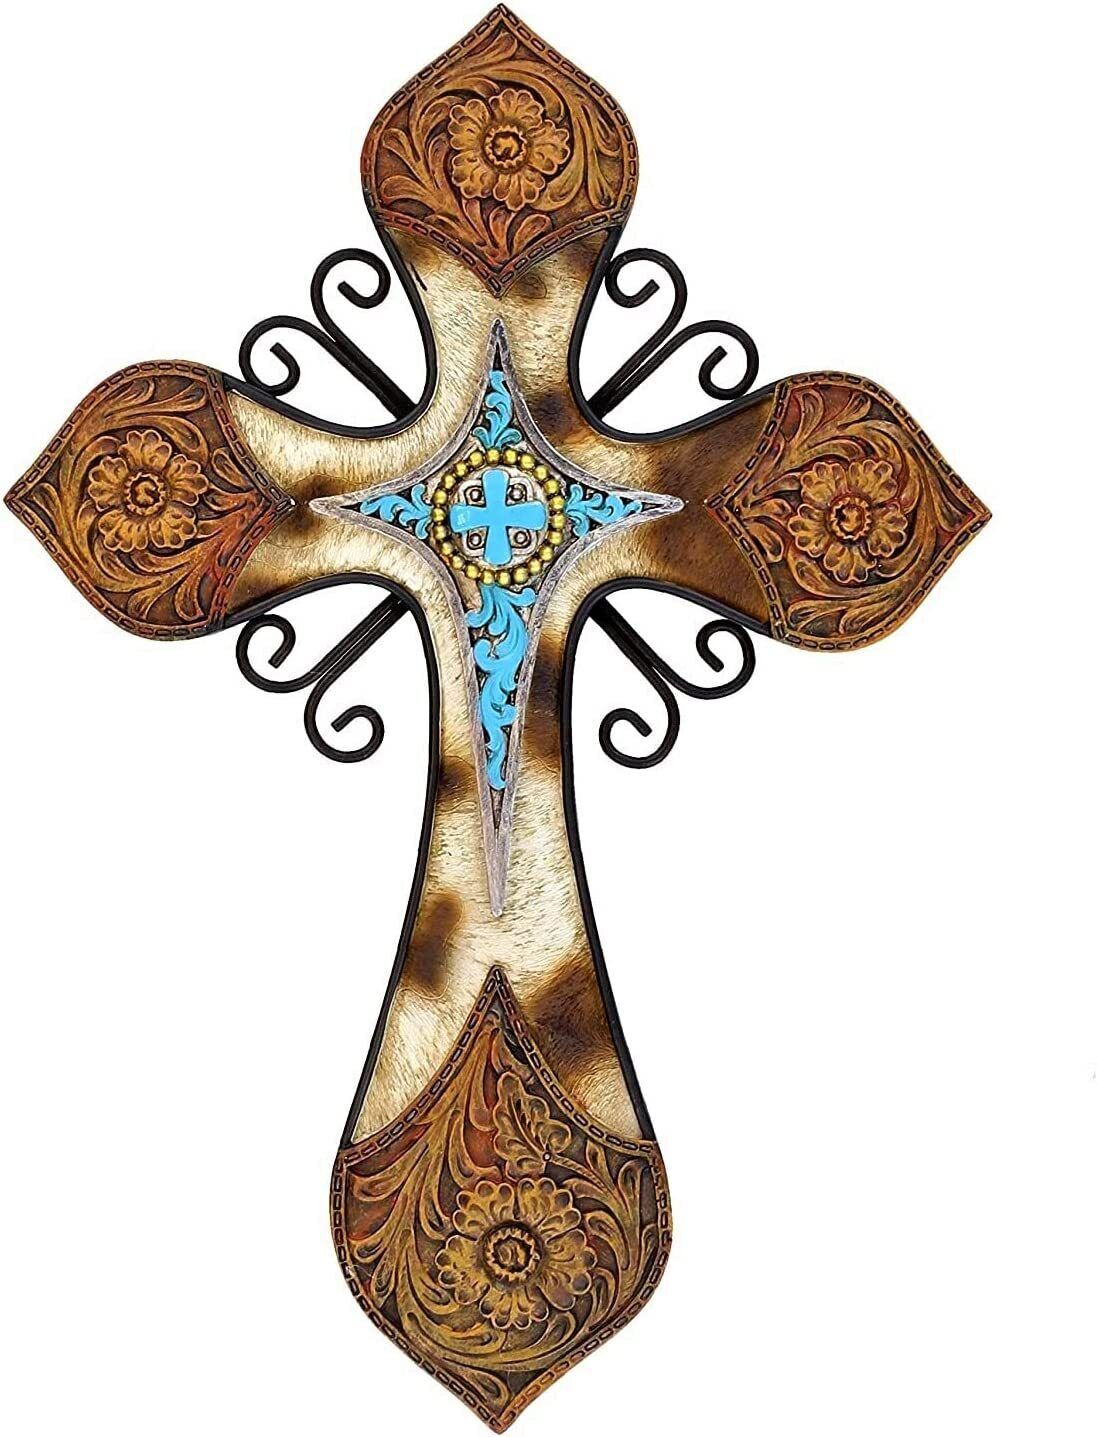 Rustic Tooled Leather Turquoise Wall Hanging Cross Spiritual Religious Art Gift